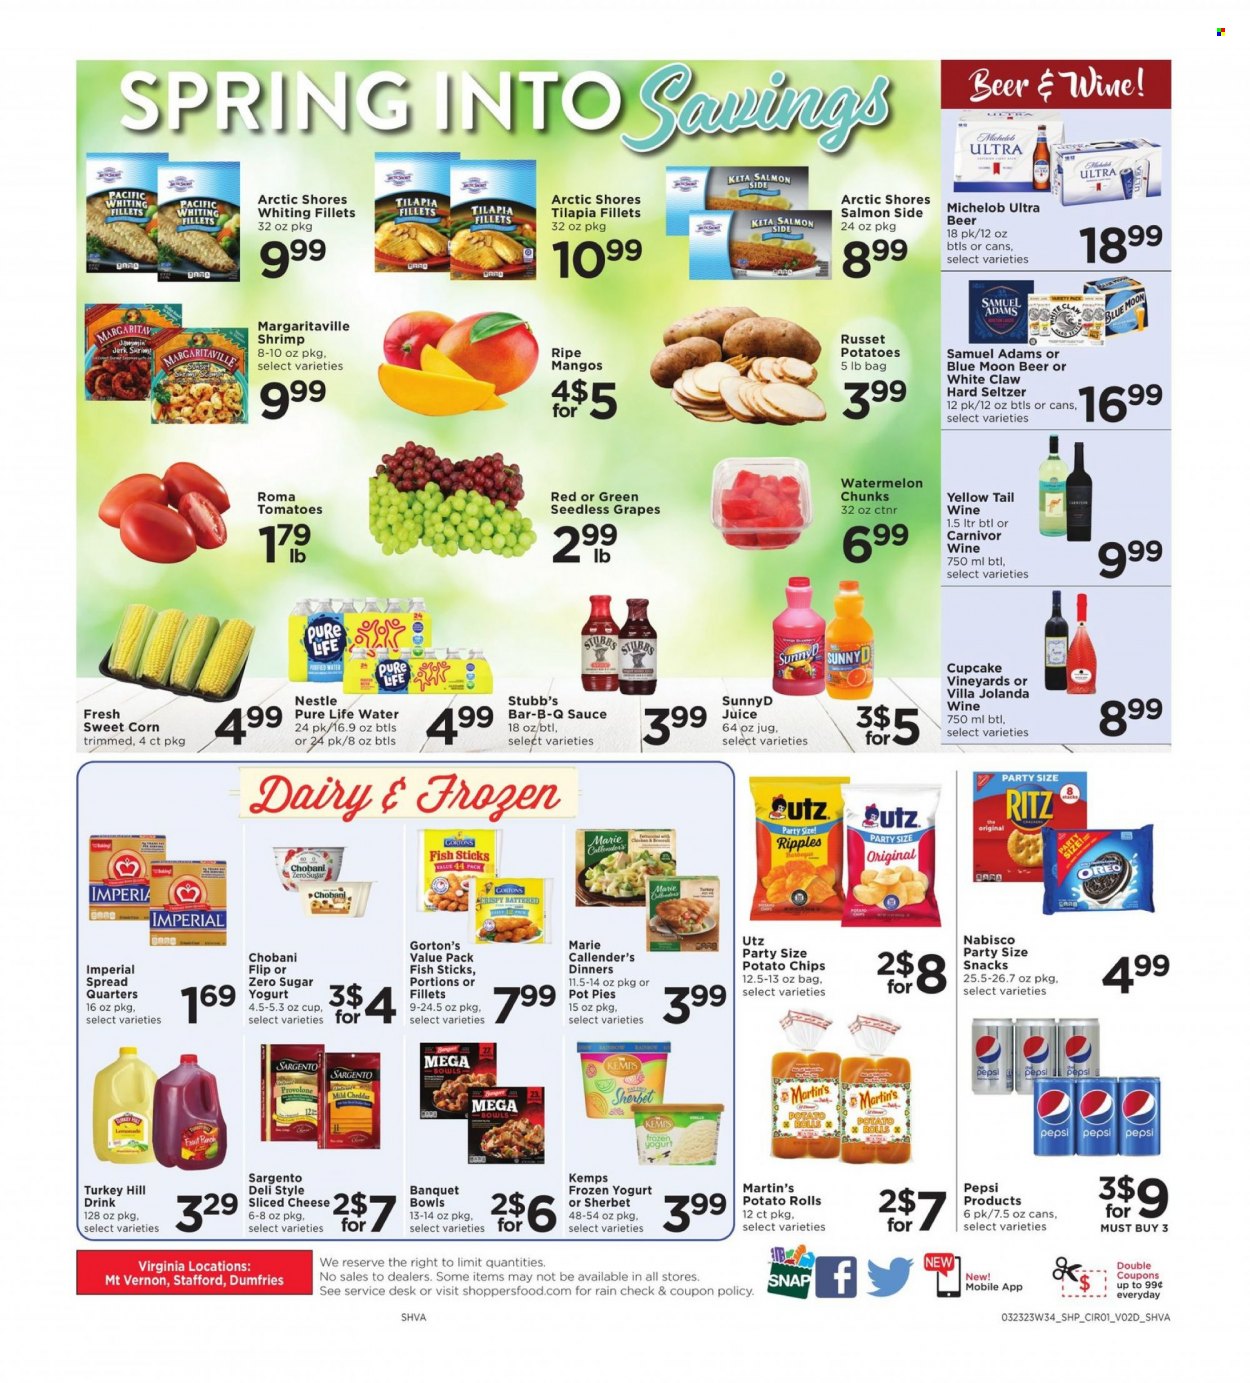 thumbnail - Shoppers Flyer - 03/23/2023 - 03/29/2023 - Sales products - potato rolls, pot pie, broccoli, corn, russet potatoes, tomatoes, sweet corn, grapes, mango, seedless grapes, watermelon, tilapia, fish, shrimps, whiting fillets, fish fingers, whiting, Gorton's, Arctic Shores, fish sticks, sauce, Marie Callender's, mild cheddar, sliced cheese, cheese, Provolone, Kemps, Sargento, Oreo, Chobani, Nestlé, snack, RITZ, potato chips, Pepsi, juice, fruit punch, purified water, Pure Life Water, water, Cupcake Vineyards, White Claw, Hard Seltzer, beer, Blue Moon, Michelob. Page 6.